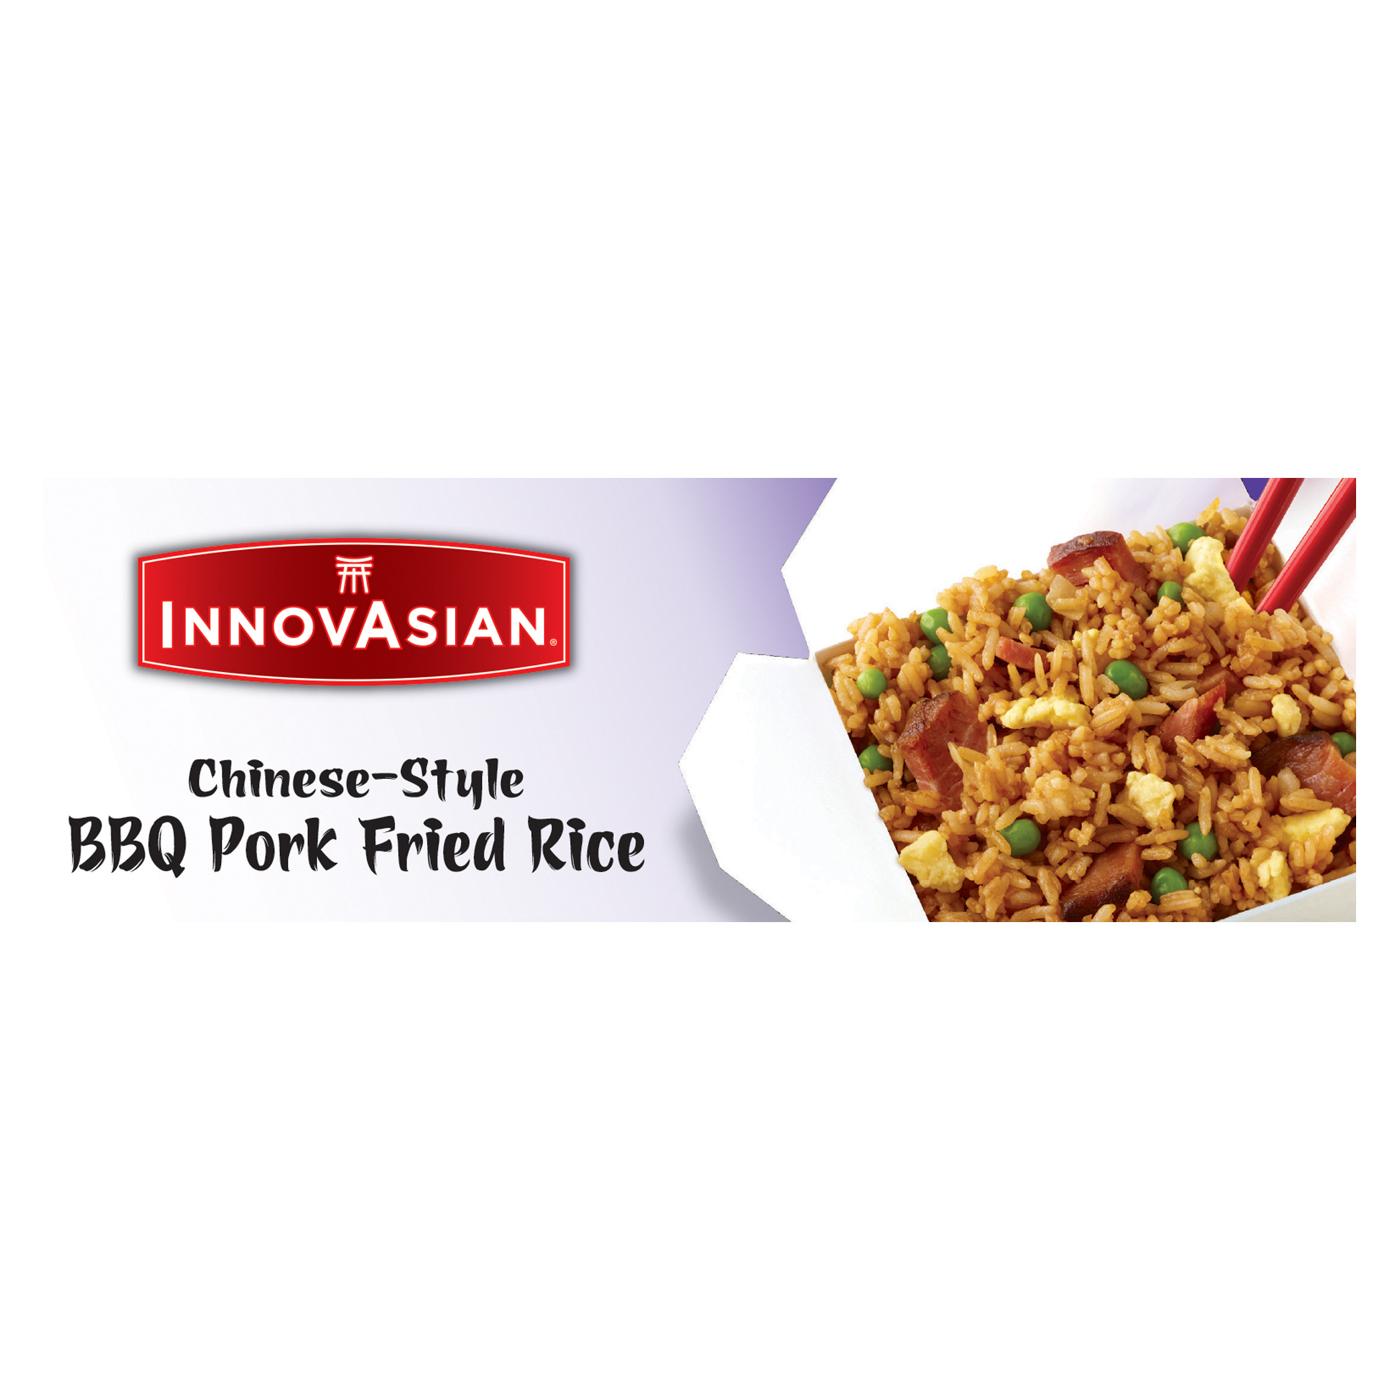 InnovAsian Frozen Chinese-Style BBQ Pork Fried Rice; image 9 of 11